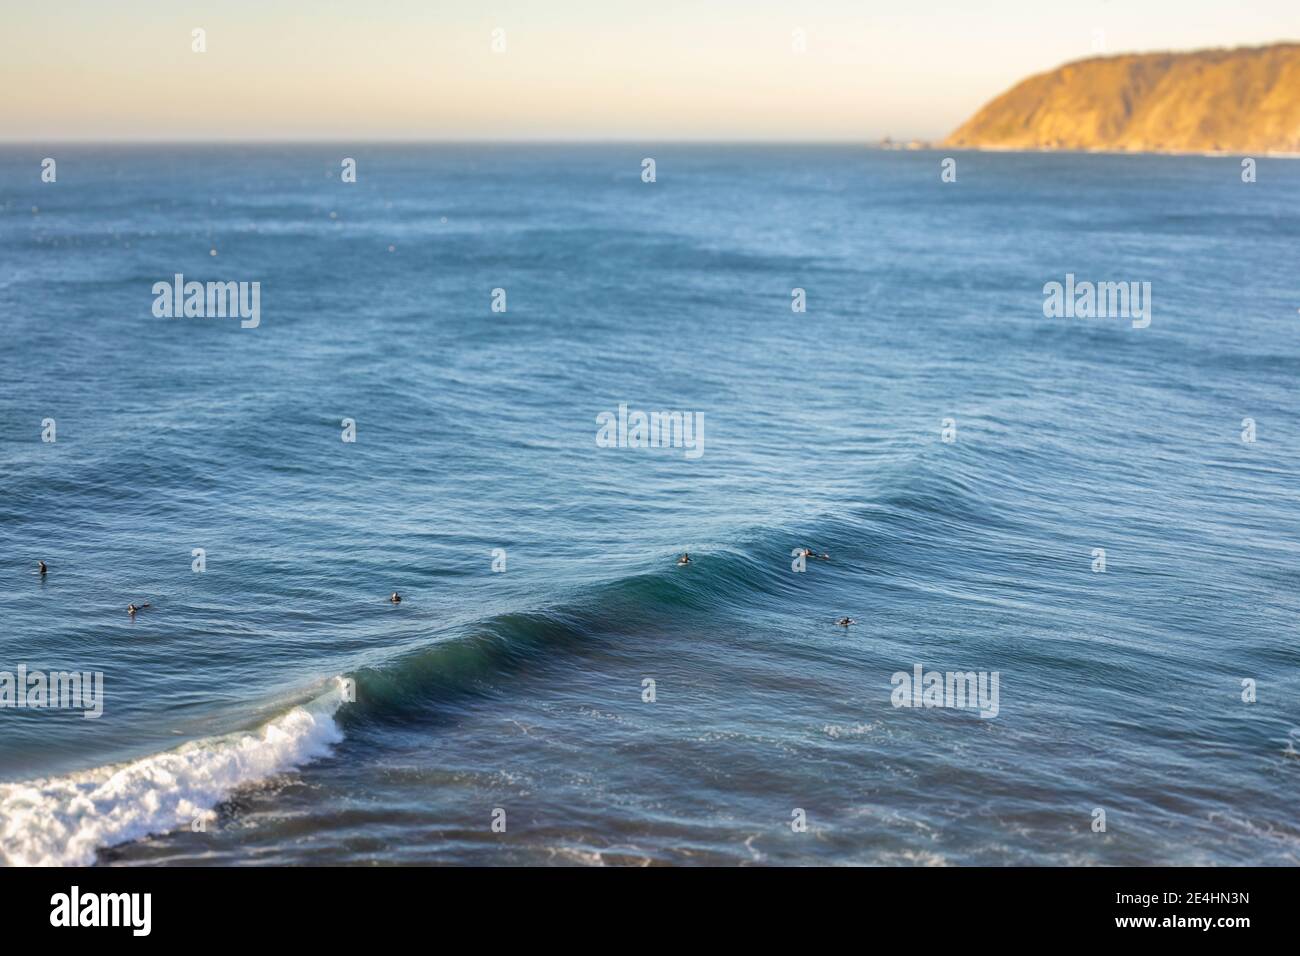 Surfers riding a big wave in the Pacific Ocean at Puertecillo spot in Chile. Amazing waves for surfing in an awe wild scenery photographed with a tilt Stock Photo